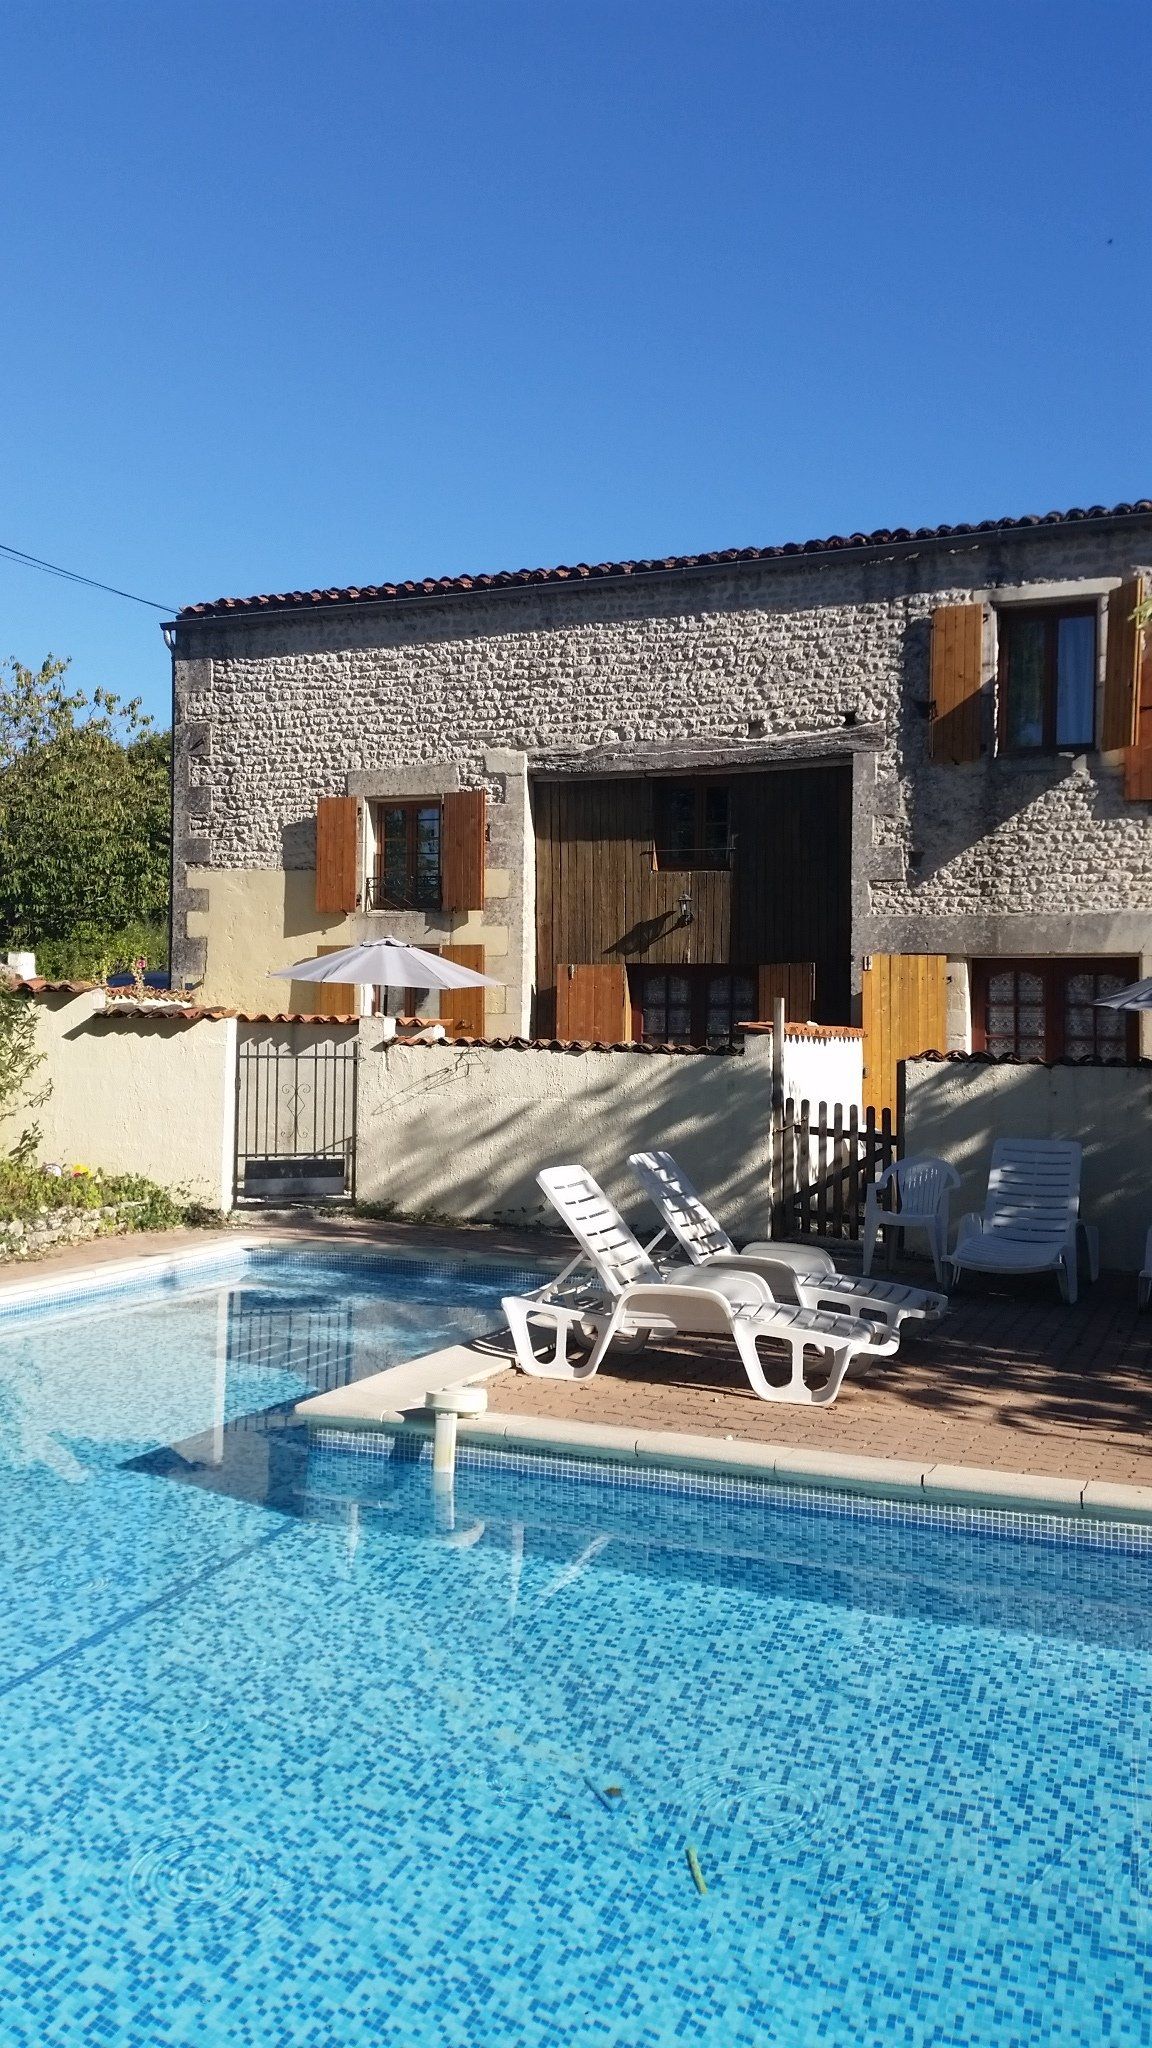 Cygne pool side holiday cottage Les Vallaies